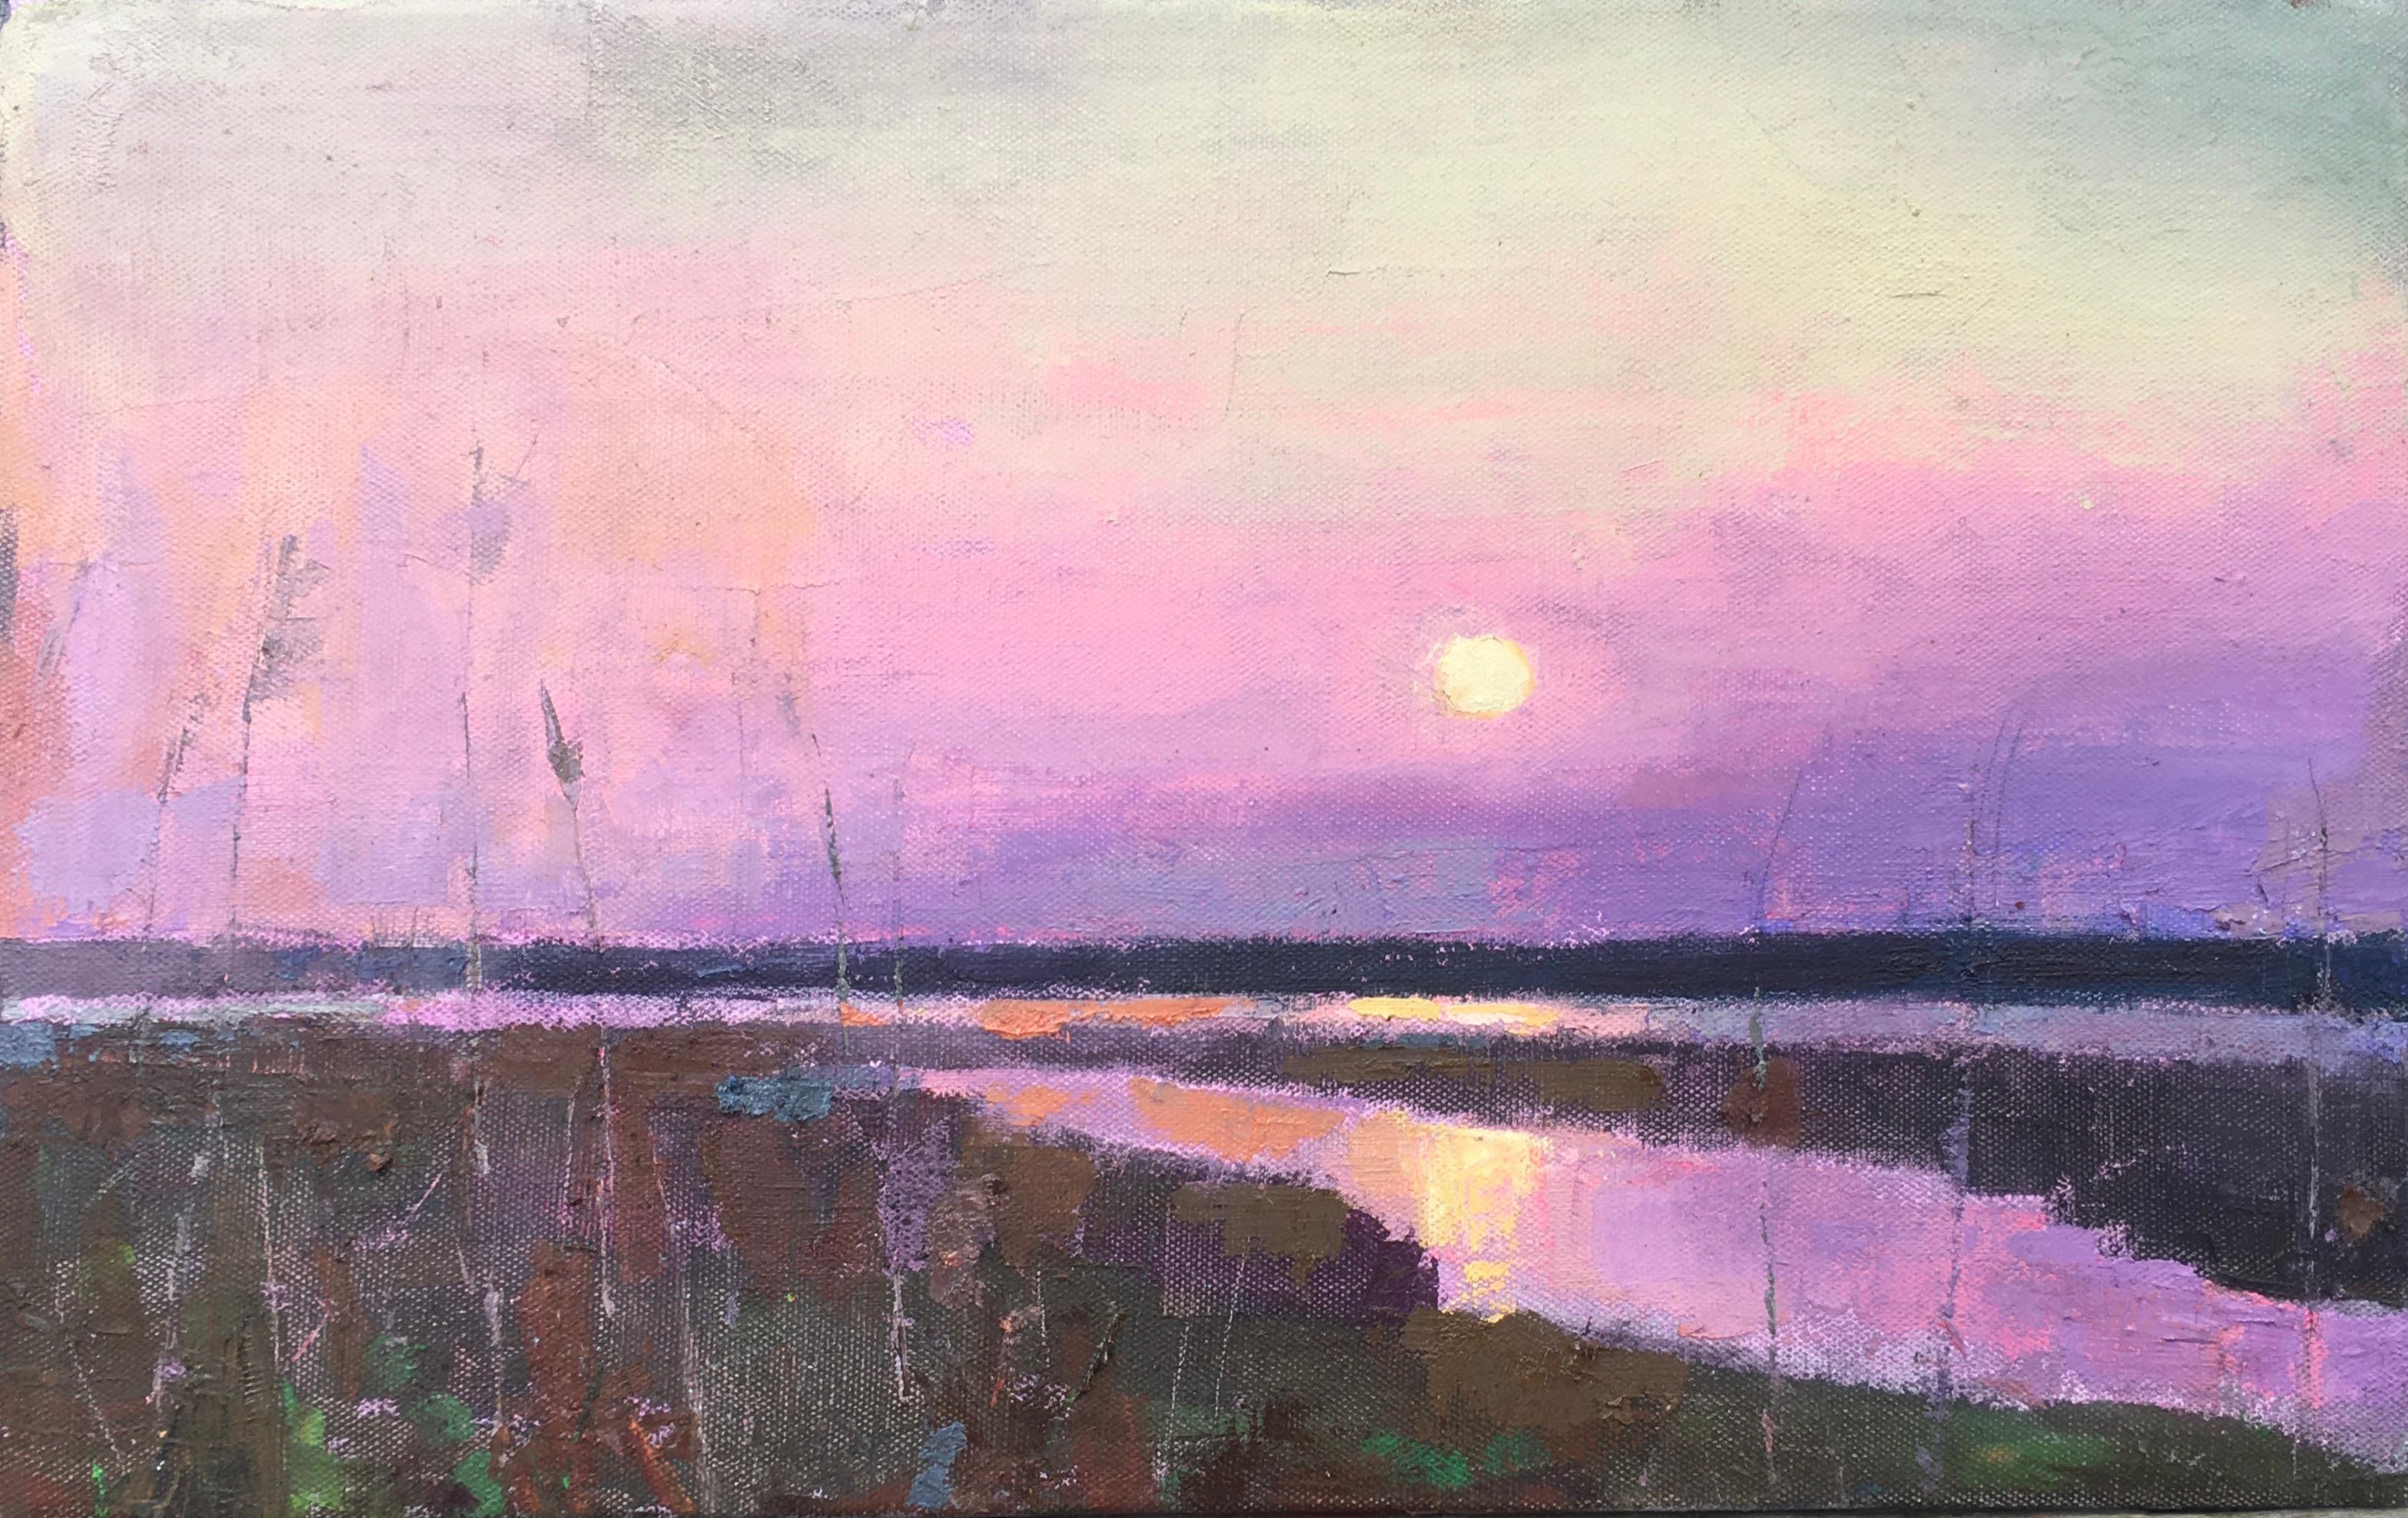 Larry Horowitz Landscape Painting - "End of Day" oil painting of a purple sunset over reflecting water and marshes